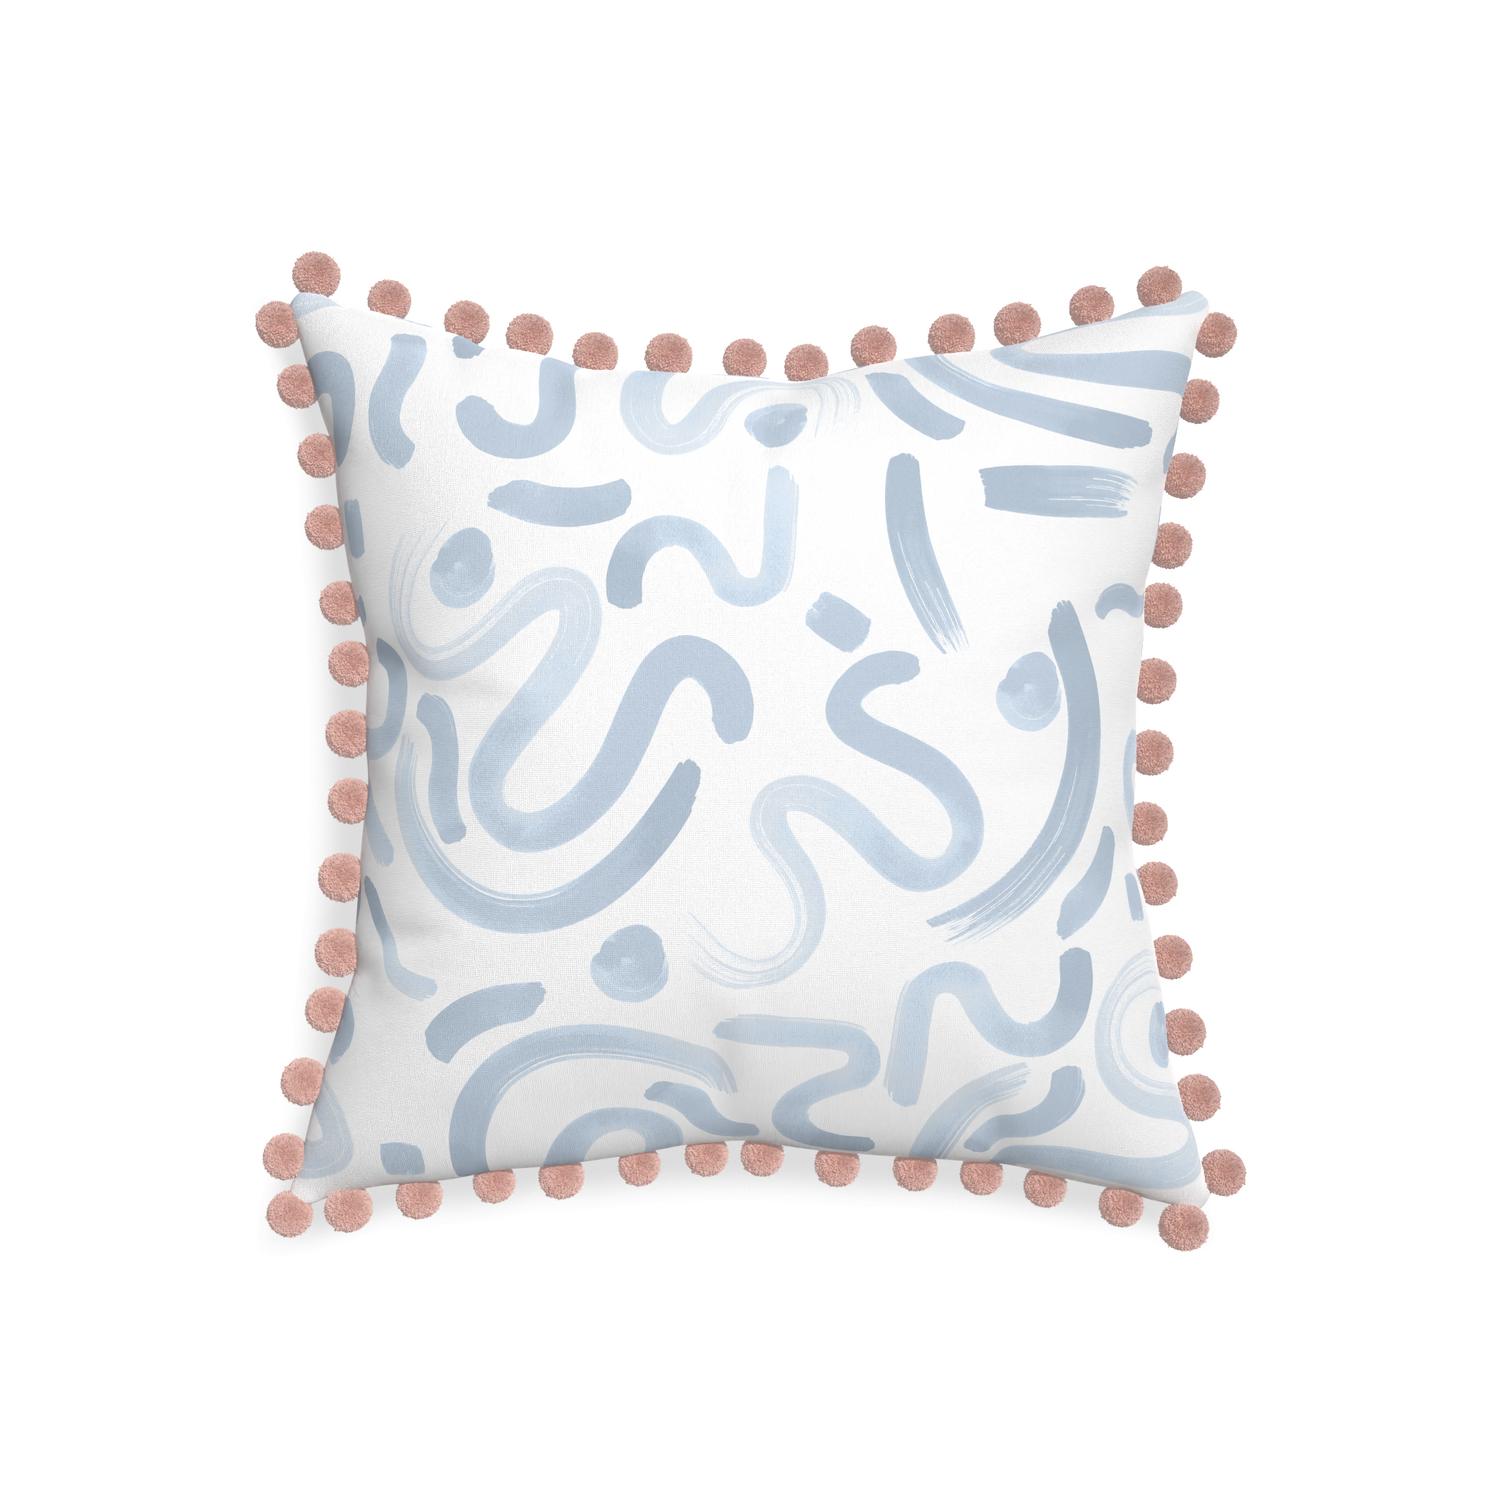 20-square hockney sky custom abstract sky bluepillow with rose pom pom on white background